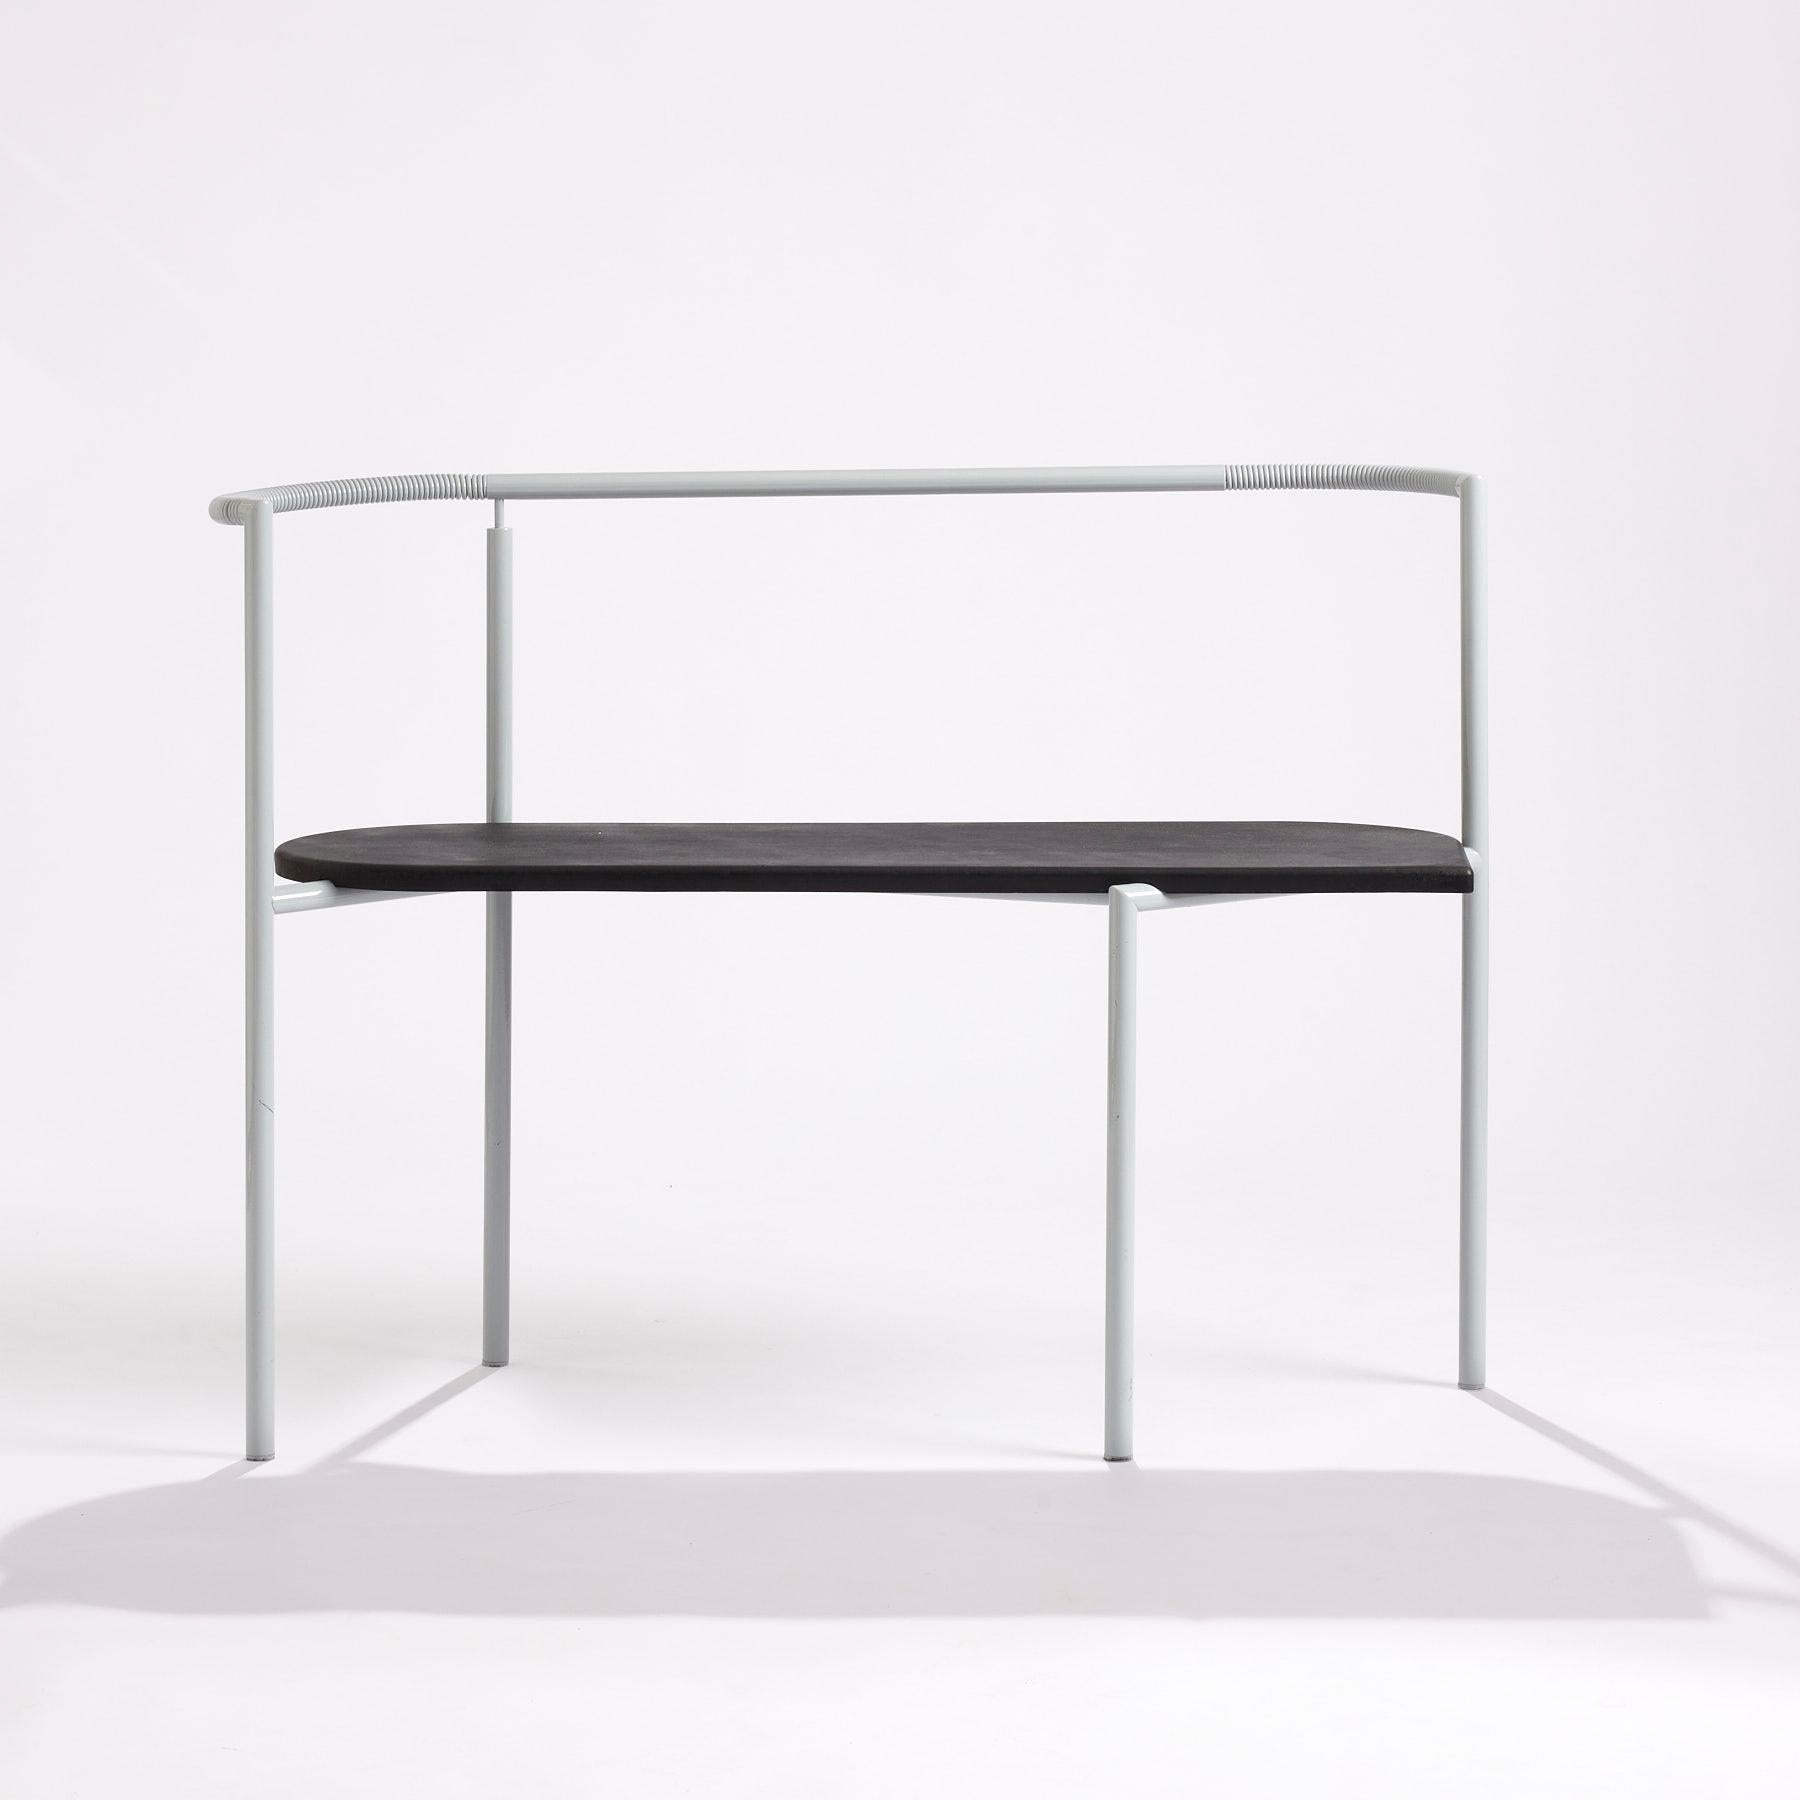 20th Century Paolo Pallucco & Mireille Rivier Bench Stalker STK9 1990 For Sale